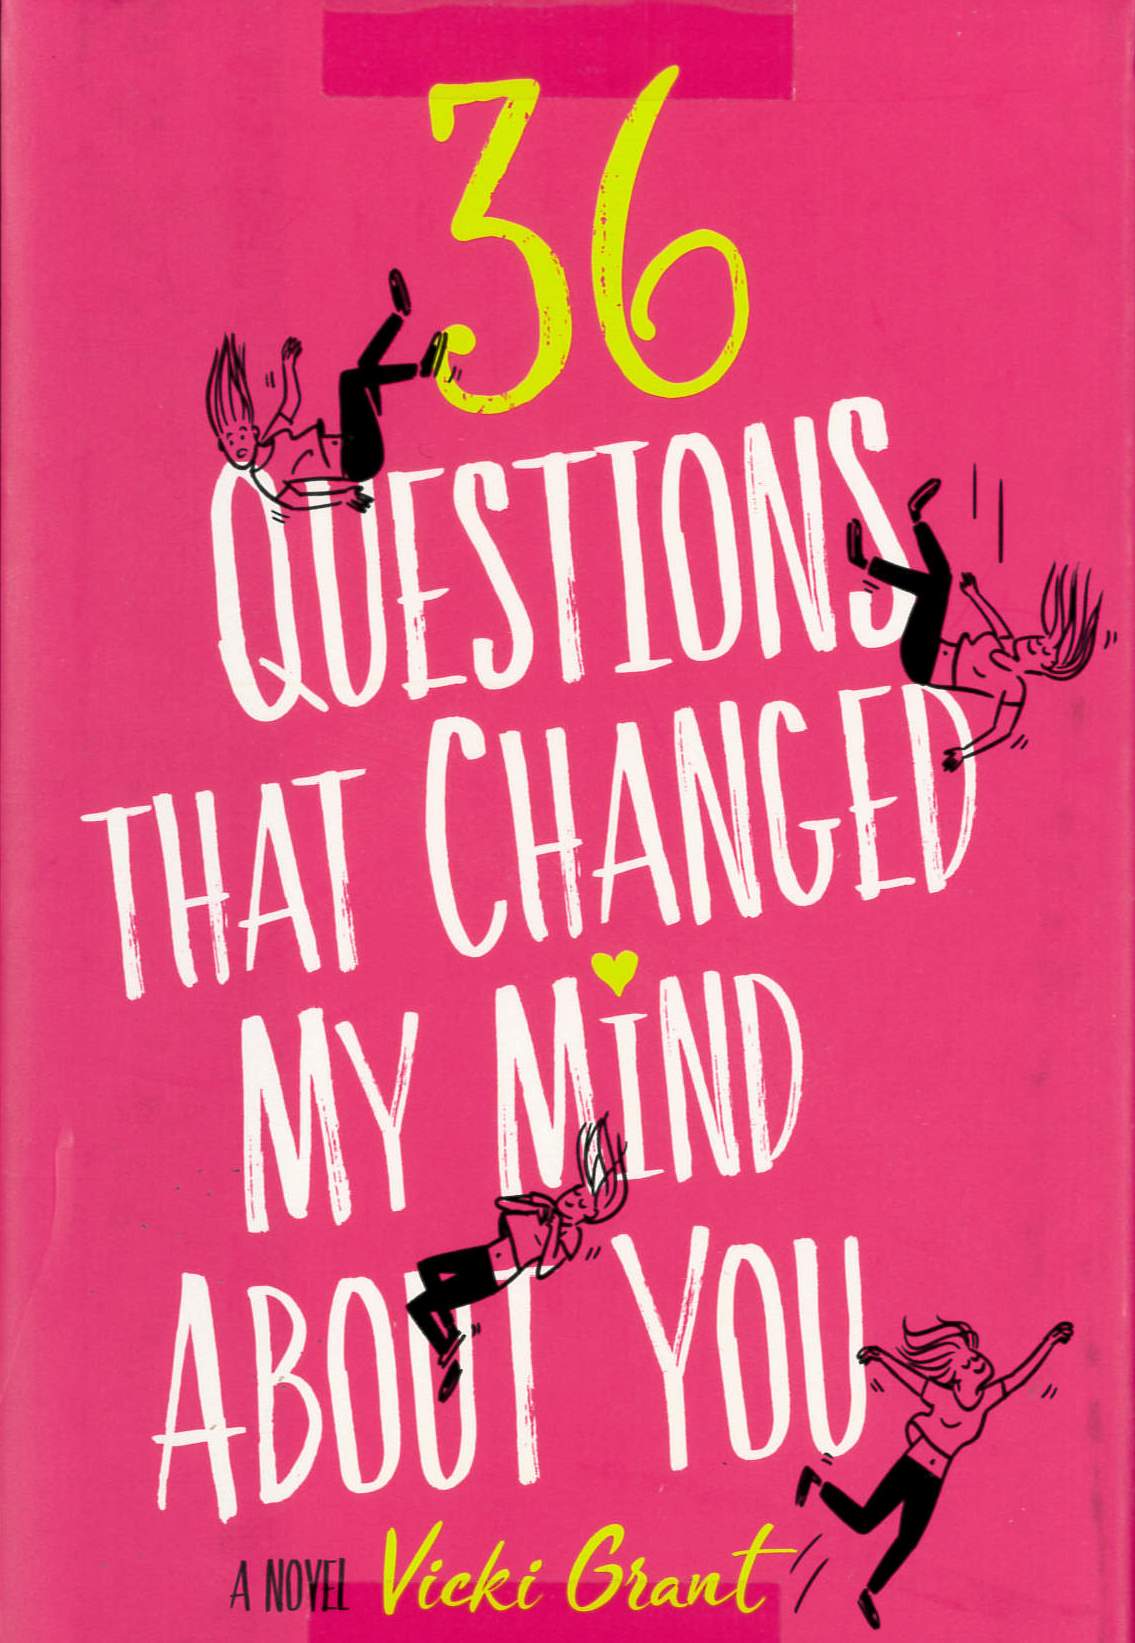 36 questions that changed my mind about you /